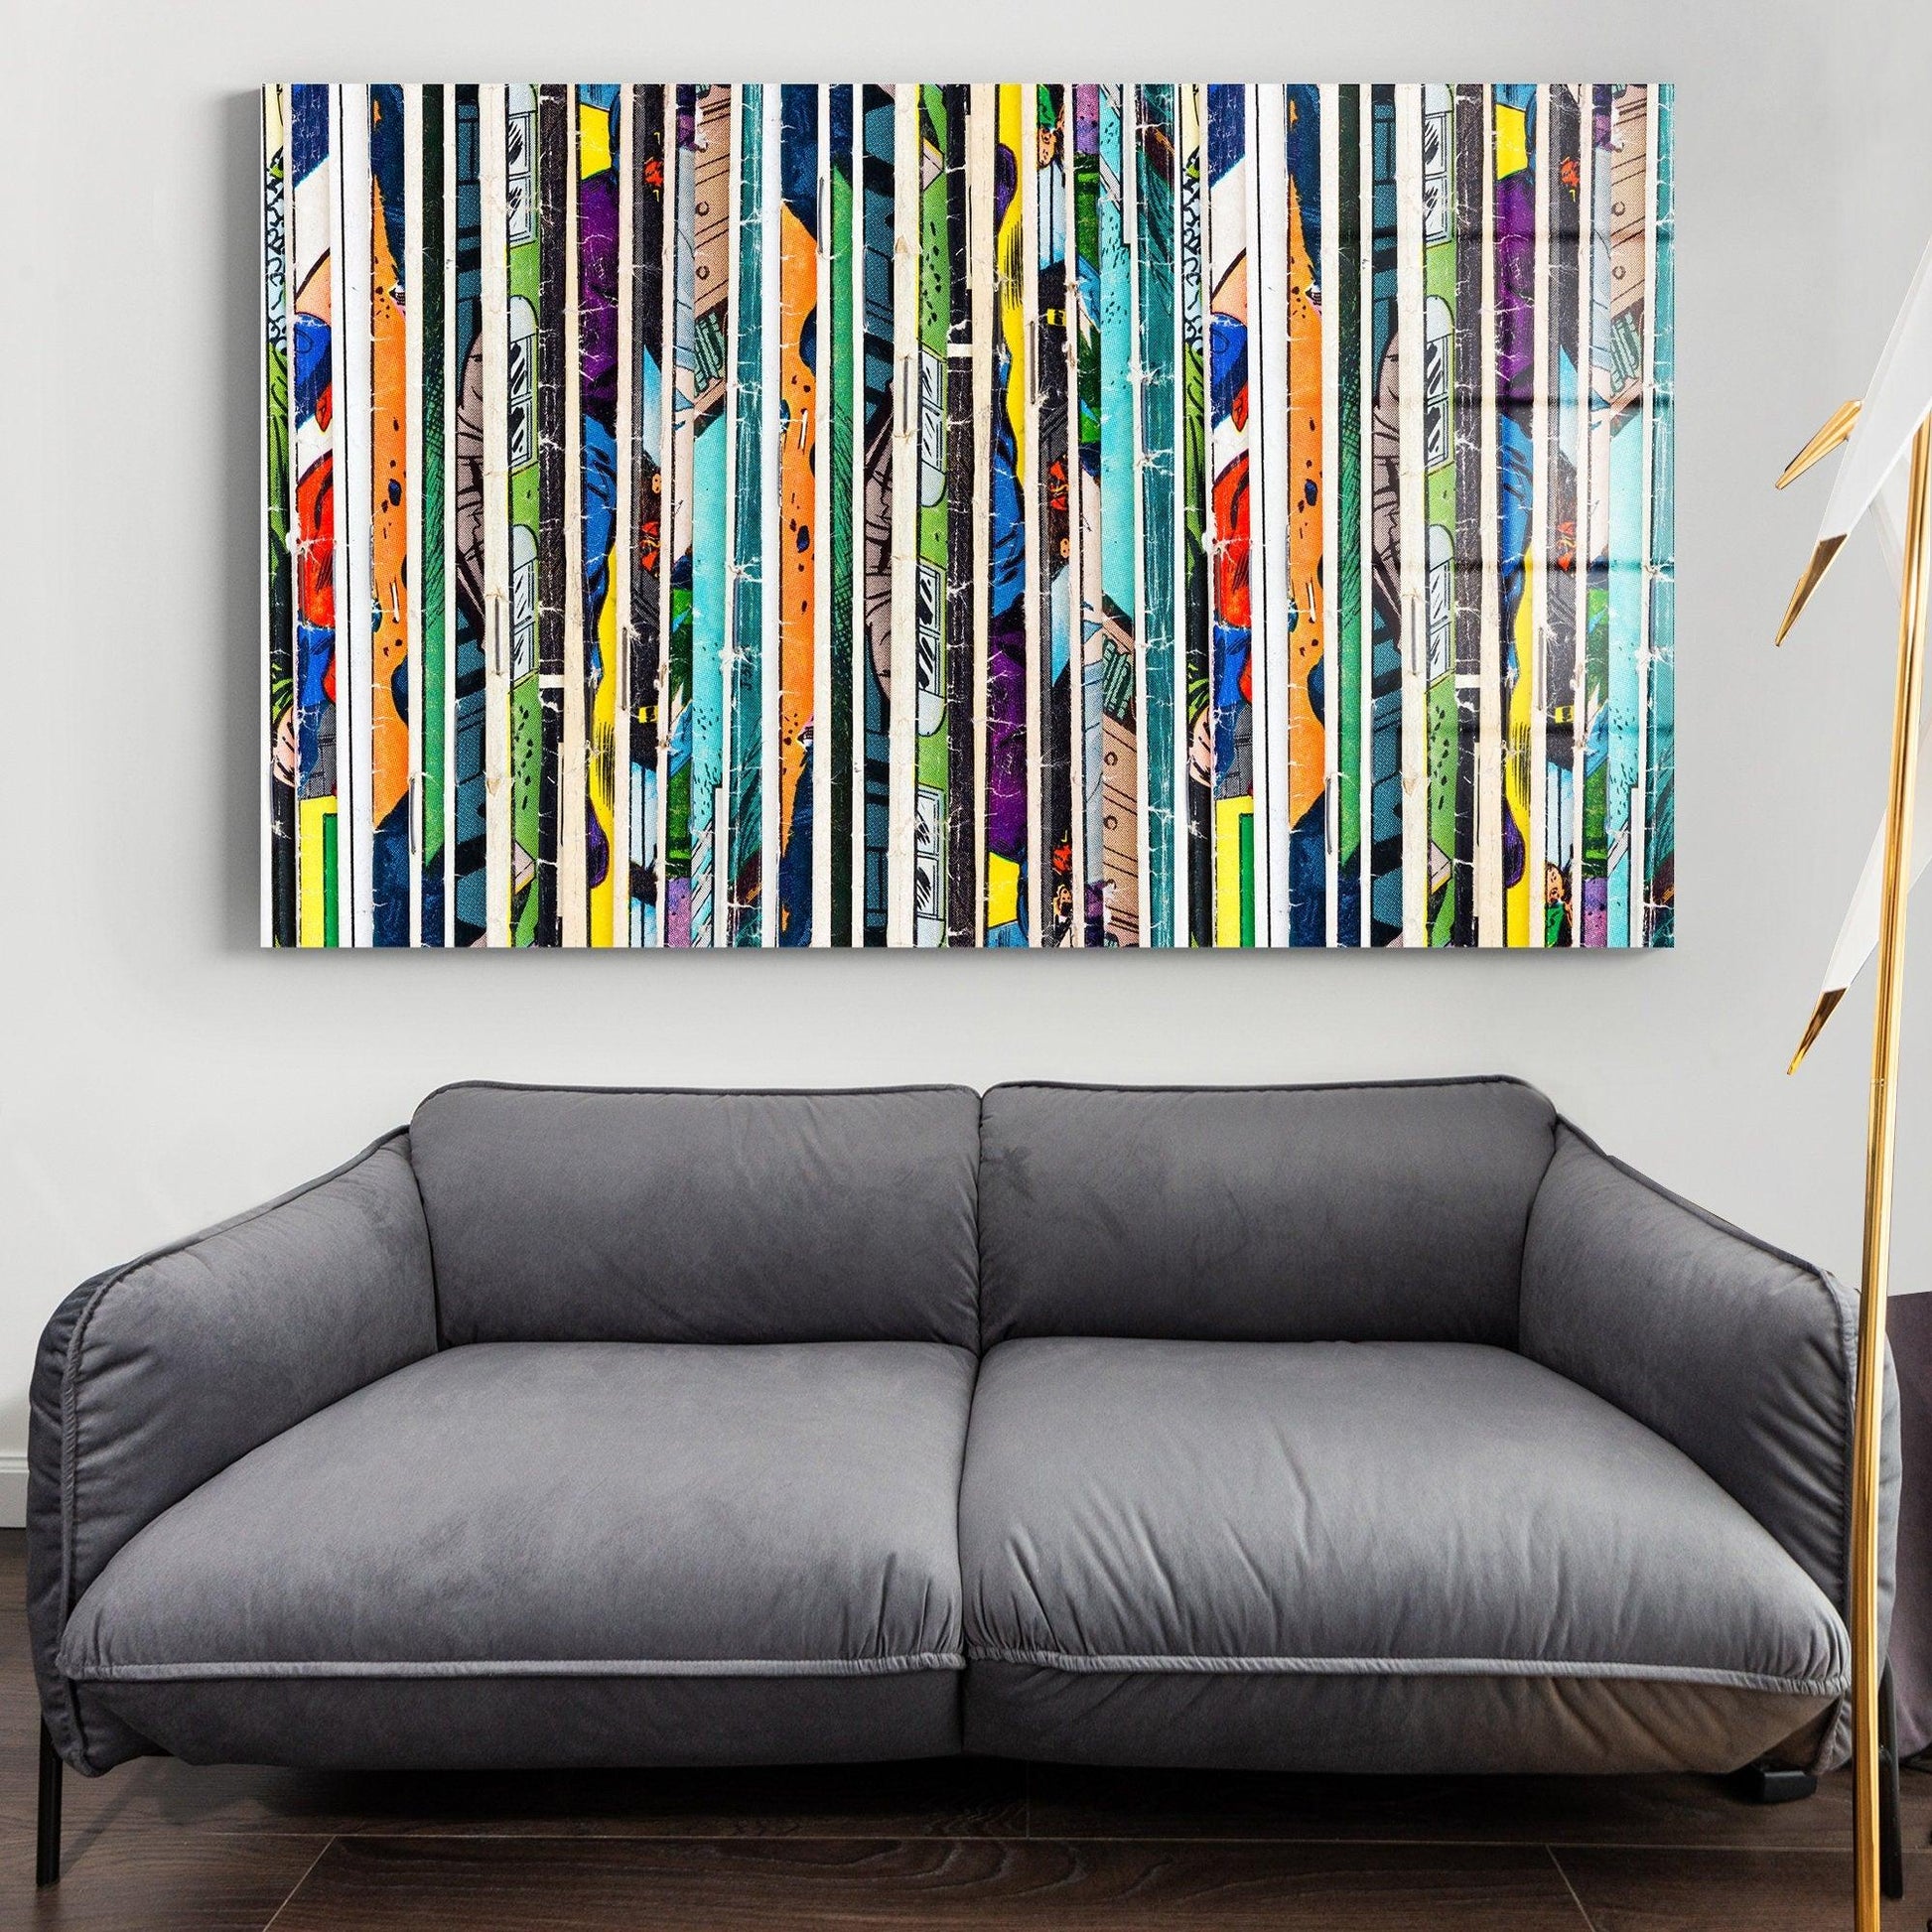 Abstraction glass printing wall decor Colorful deco, Comic book vintage, graffiti tempered glass wall art, office decor for wall, canvas art